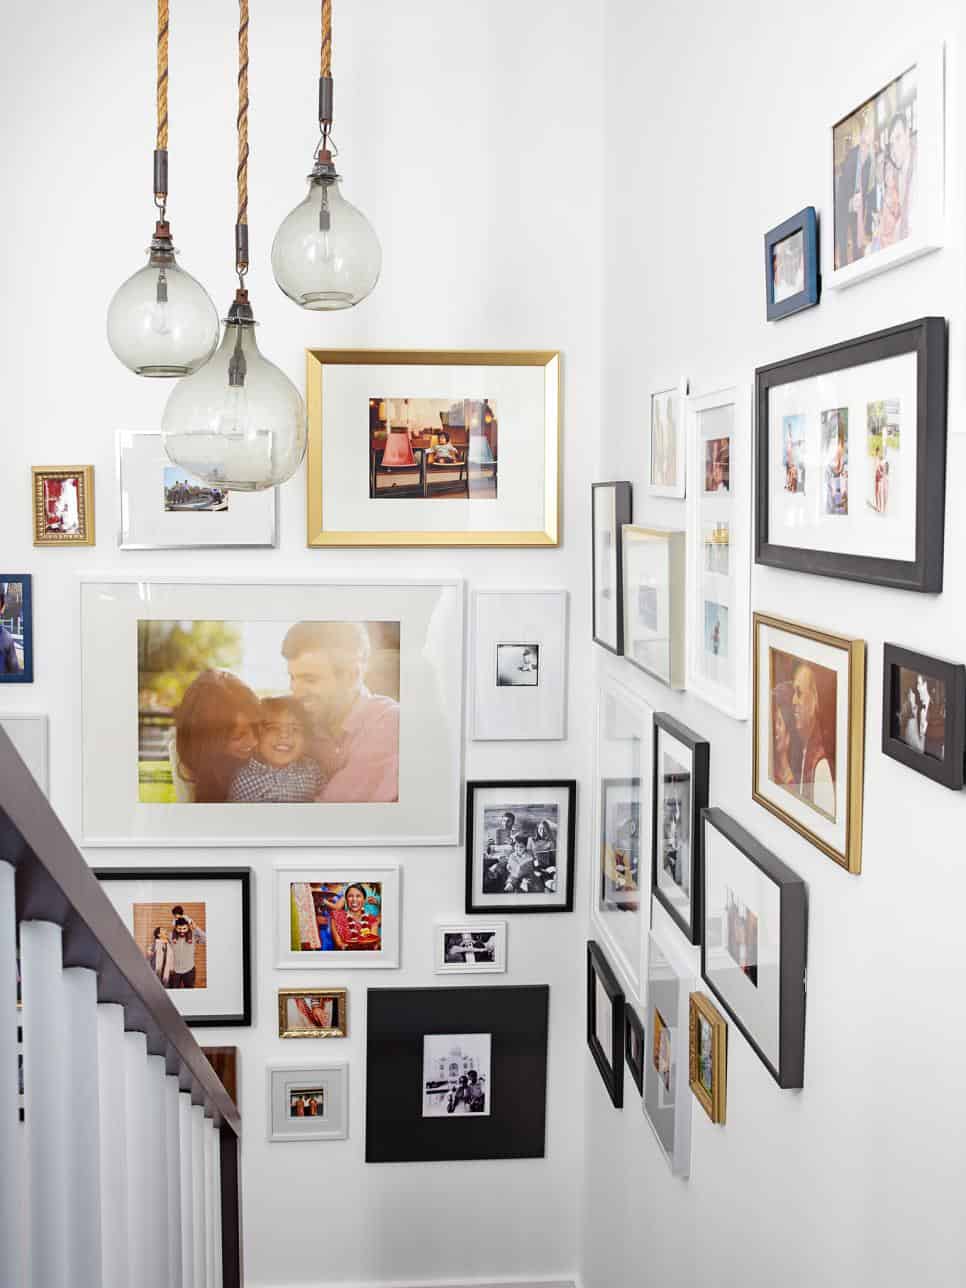 If you are wondering how to display family photos in a stairwell this eclectic and tasteful gallery wall can be a real game changer.